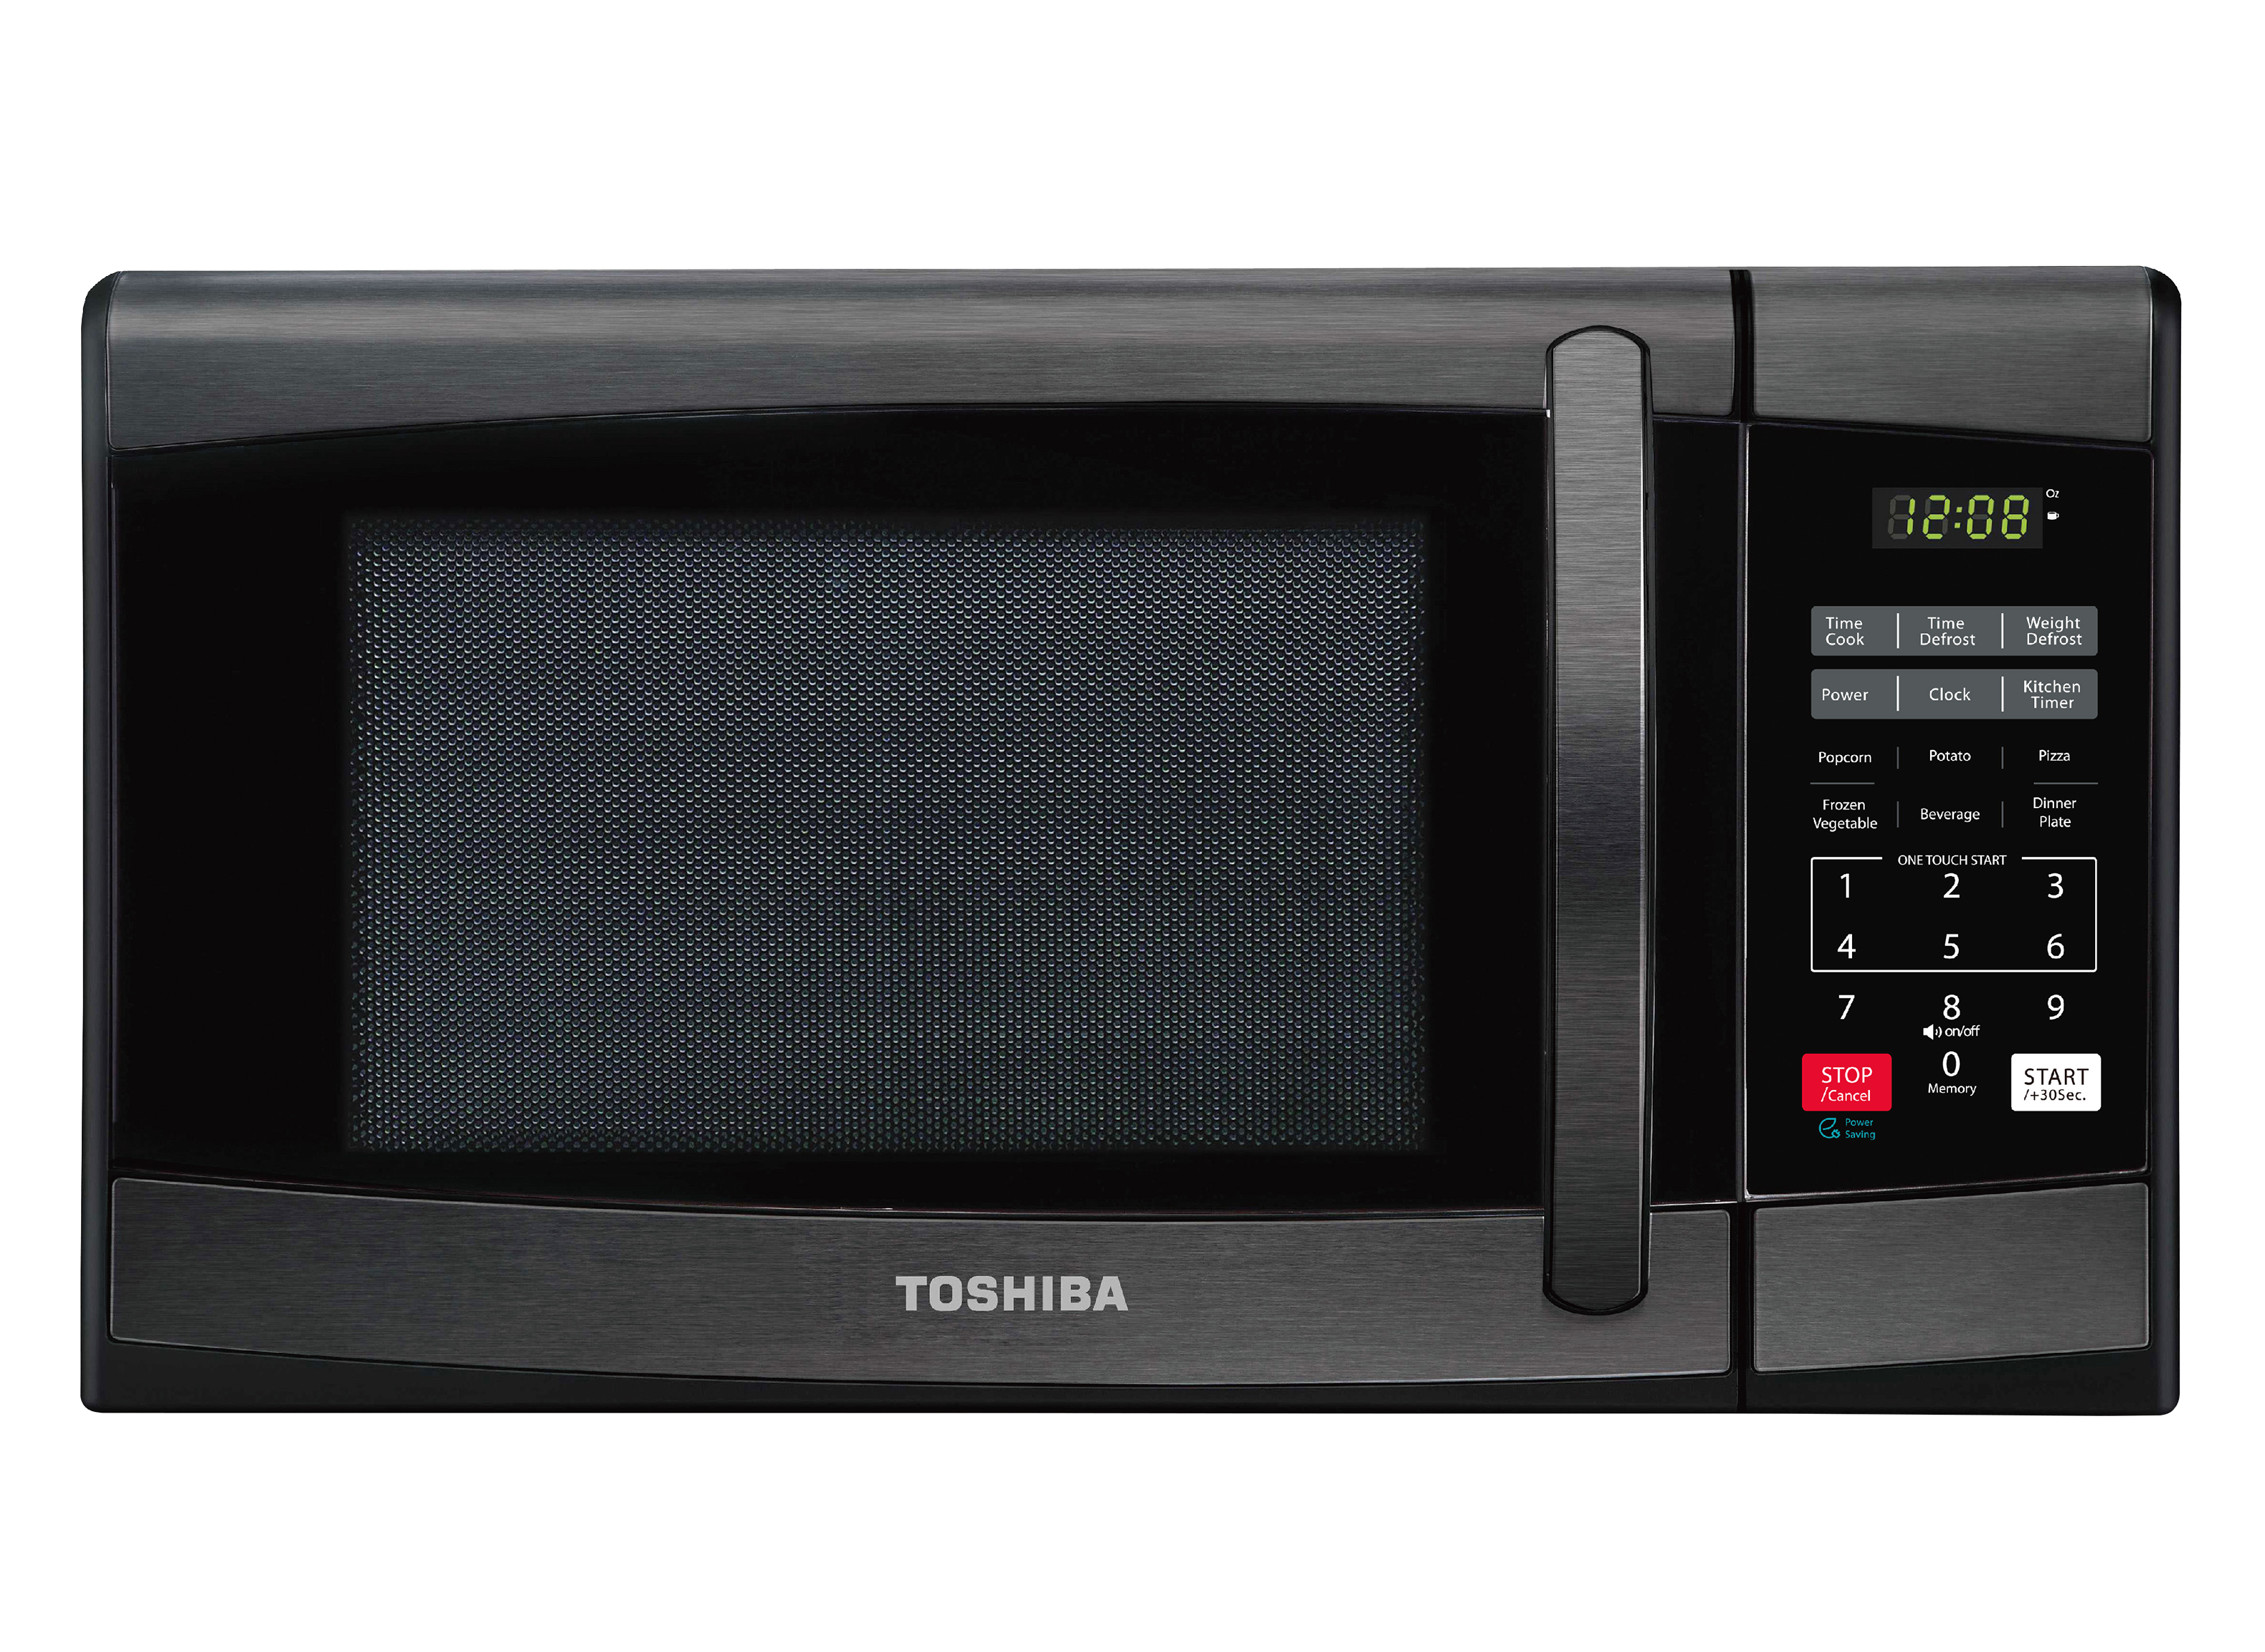 https://crdms.images.consumerreports.org/prod/products/cr/models/405257-midsized-countertop-microwaves-toshiba-ml2em25pabs-10026458.png